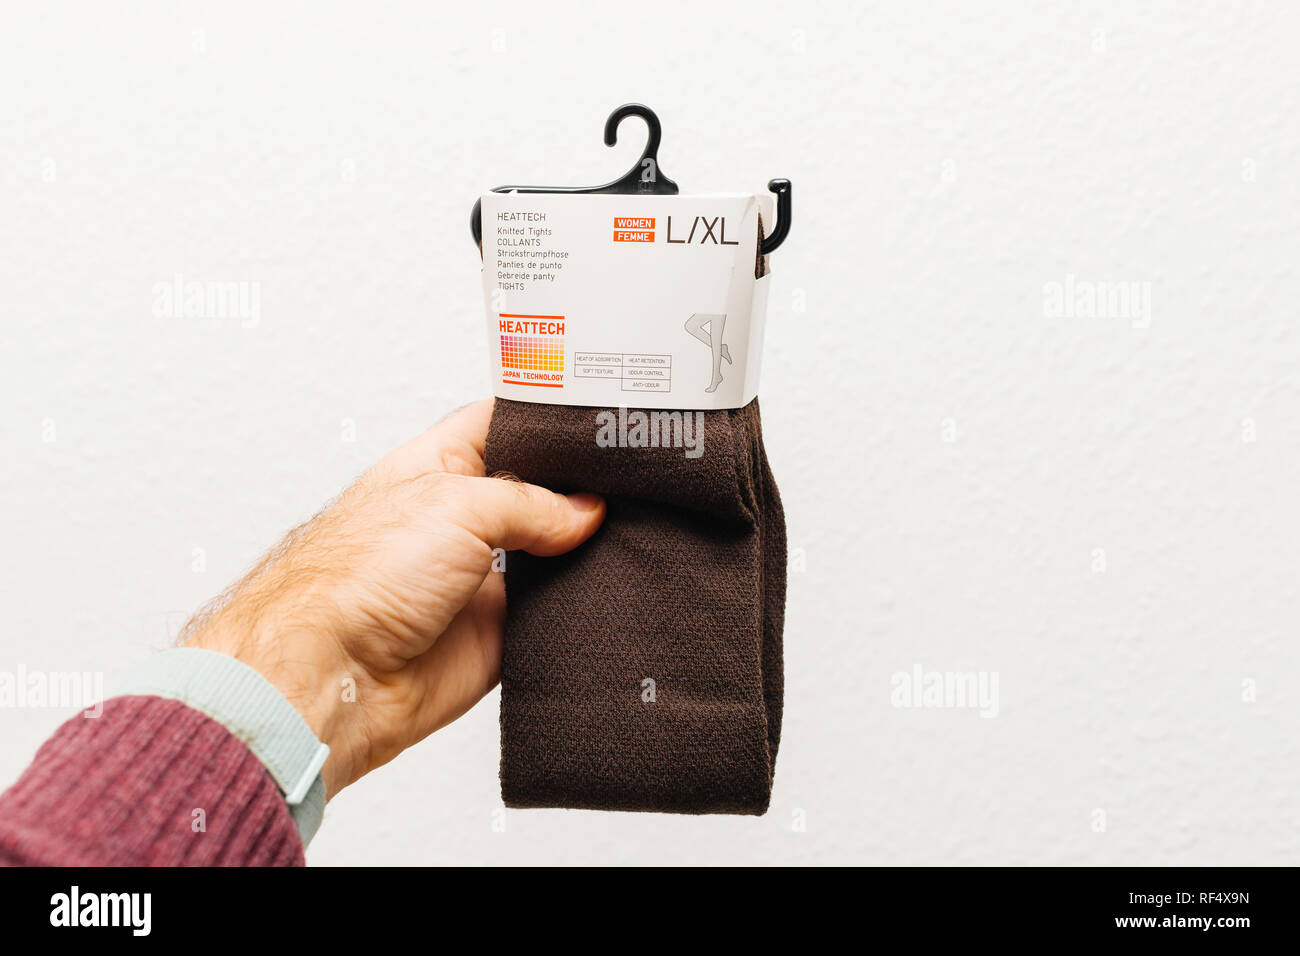 Paris, France - Dec 21, 2018: Man holding against white background a new  package with Heattech knitted tights manufactured by Uniqlo Japanese casual  wear designer, manufacturer and retailer Stock Photo - Alamy